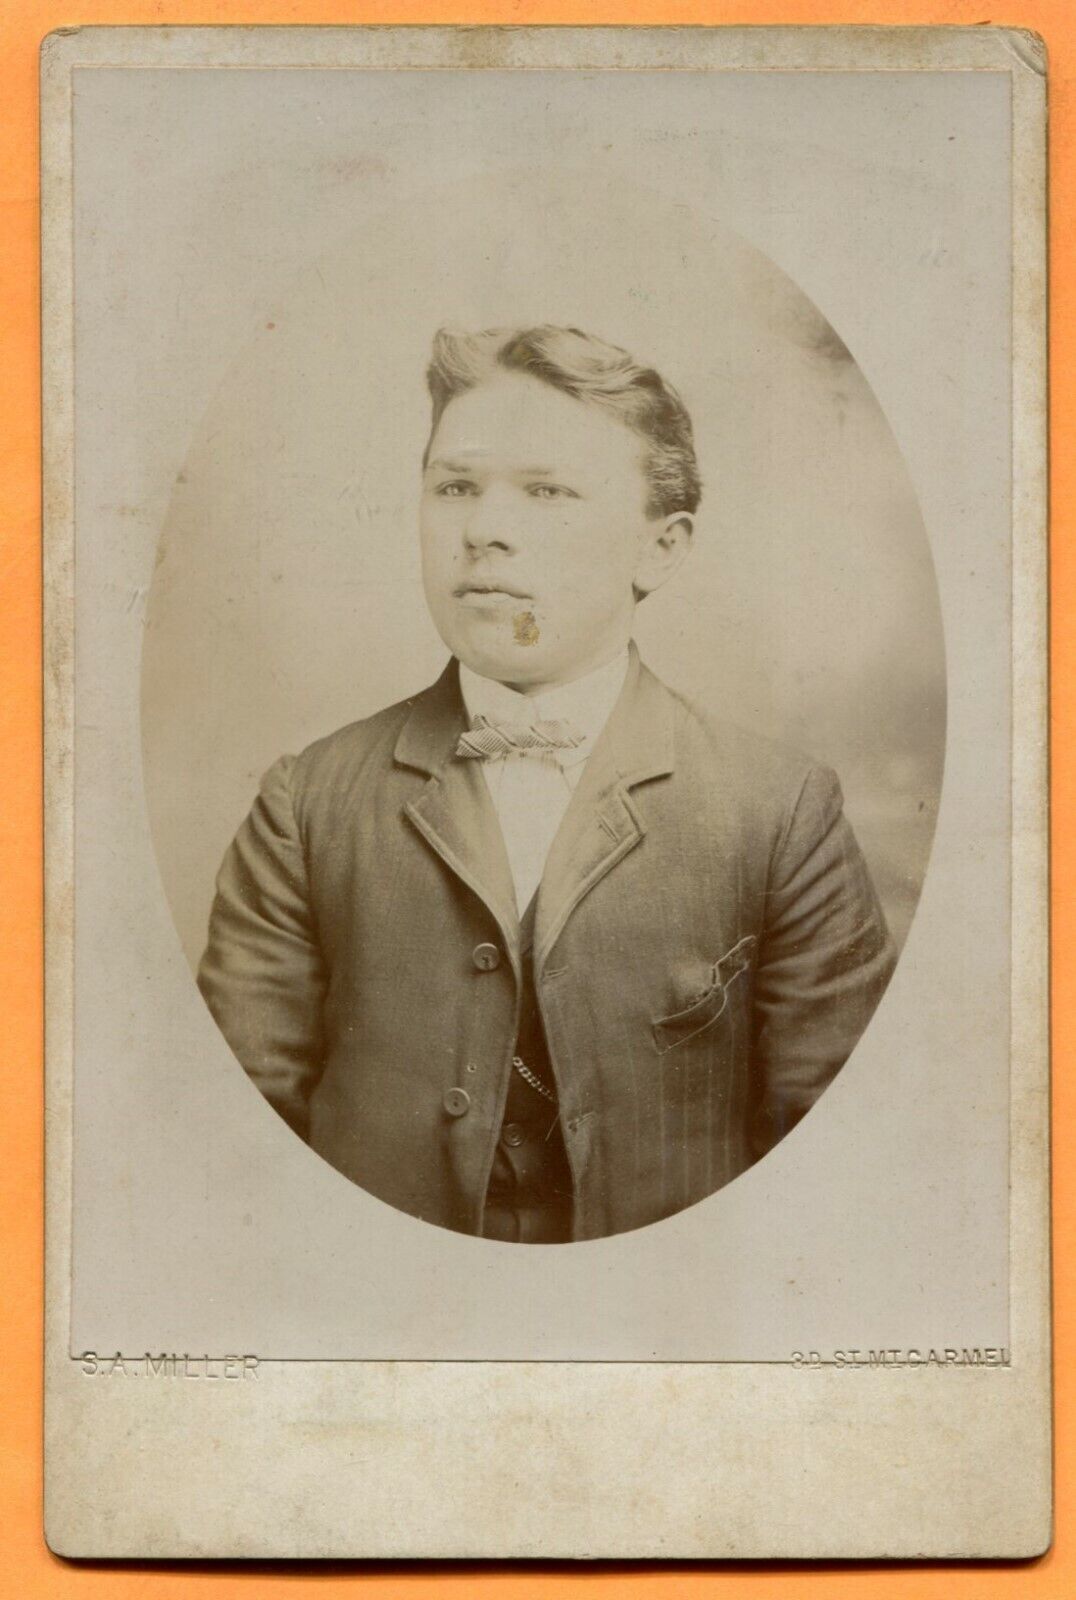 Mount Carmel, PA, Portrait of a Young Man, by Miller, circa 1890s 